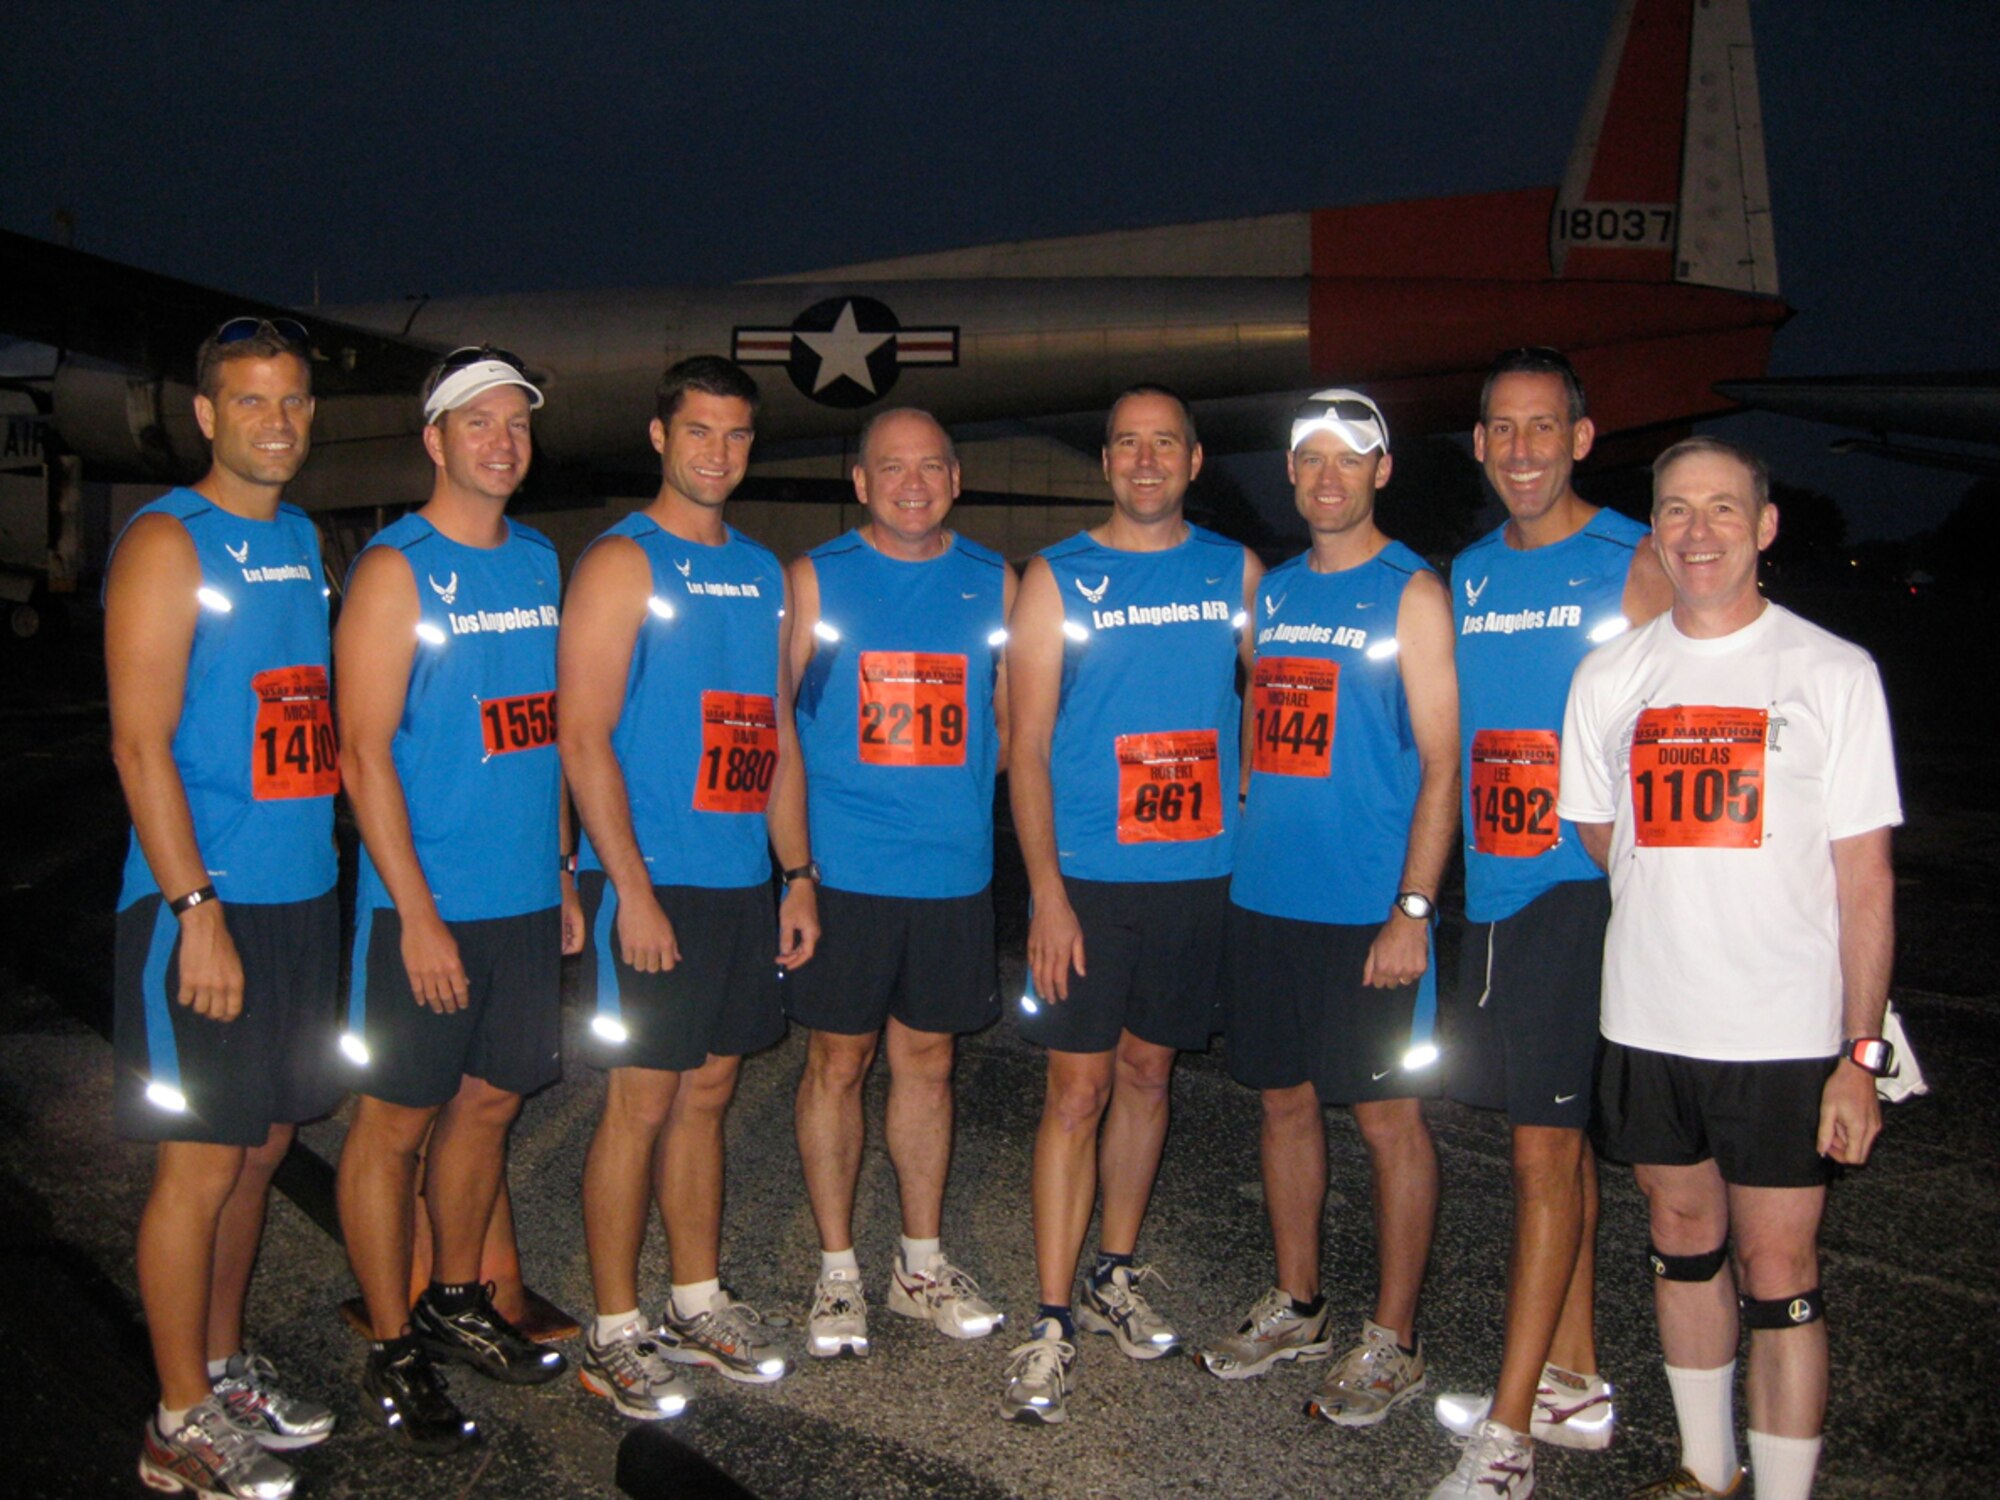 Members of the Los Angeles AFB Marathon Team are joined by SMC Executive Director Douglas Loverro prior to the start of the Air Force Marathon, Sept. 20. The team’s top place finisher was Maj. Lance Ranere who finished the race in 3 hours 26 minutes, placing 139th overall.